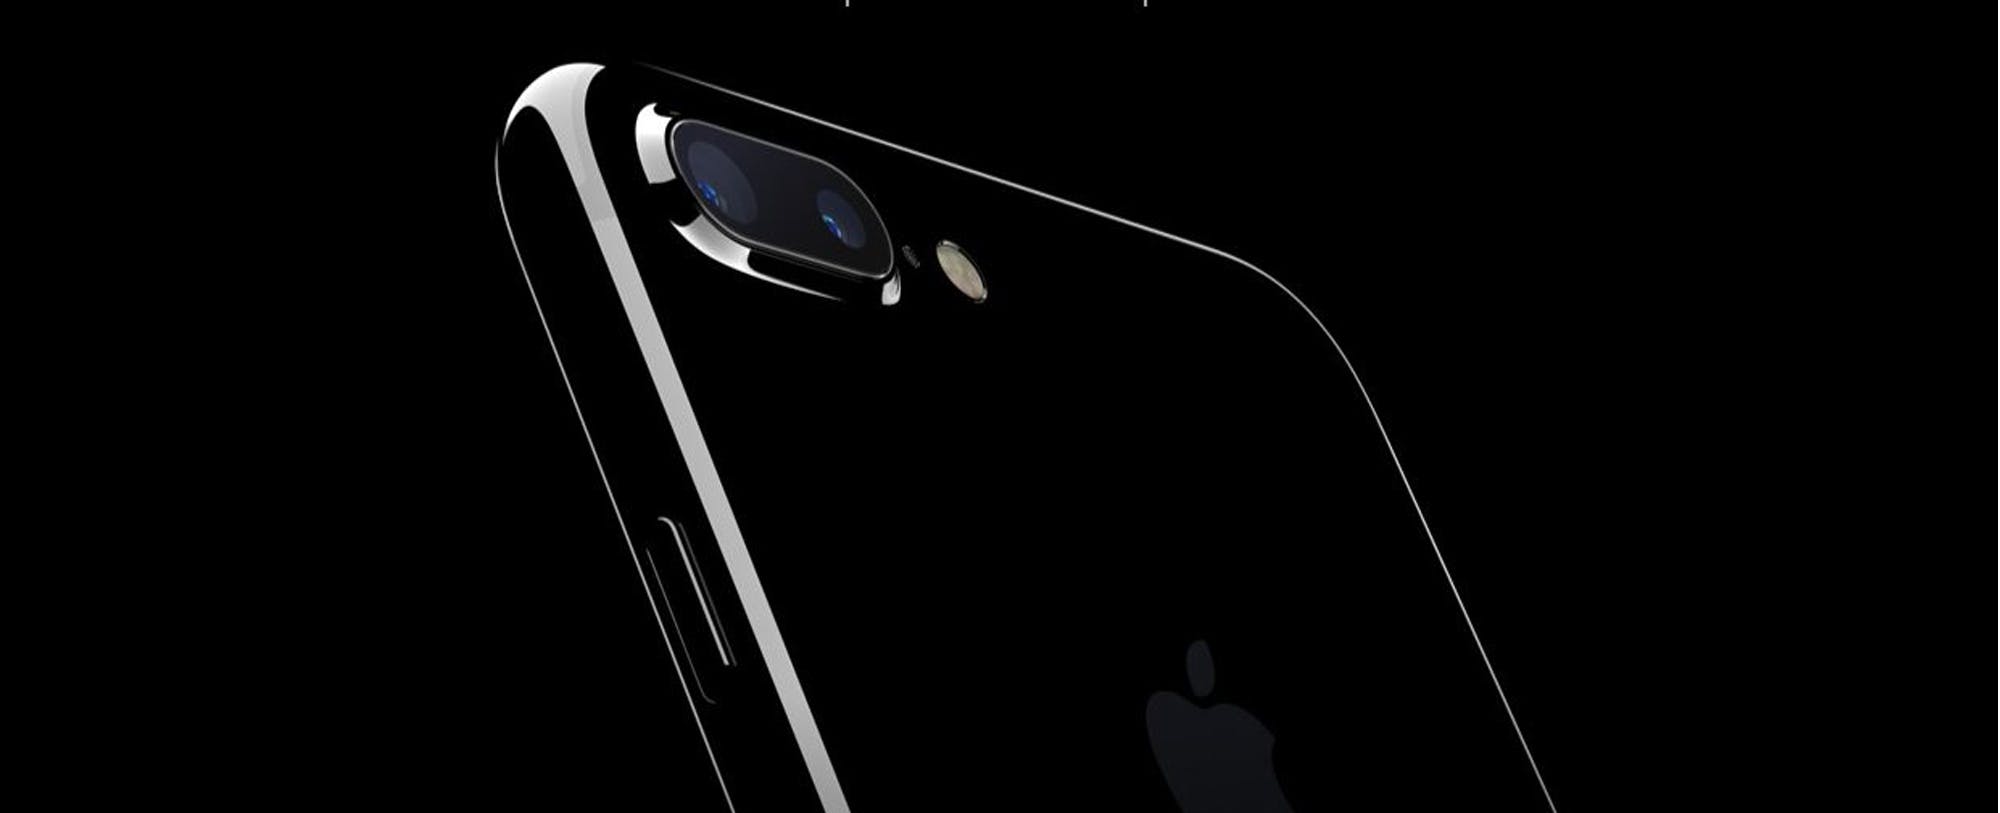 This Just In: Apple Reveals its iPhone 7 and Apple Watch Series 2